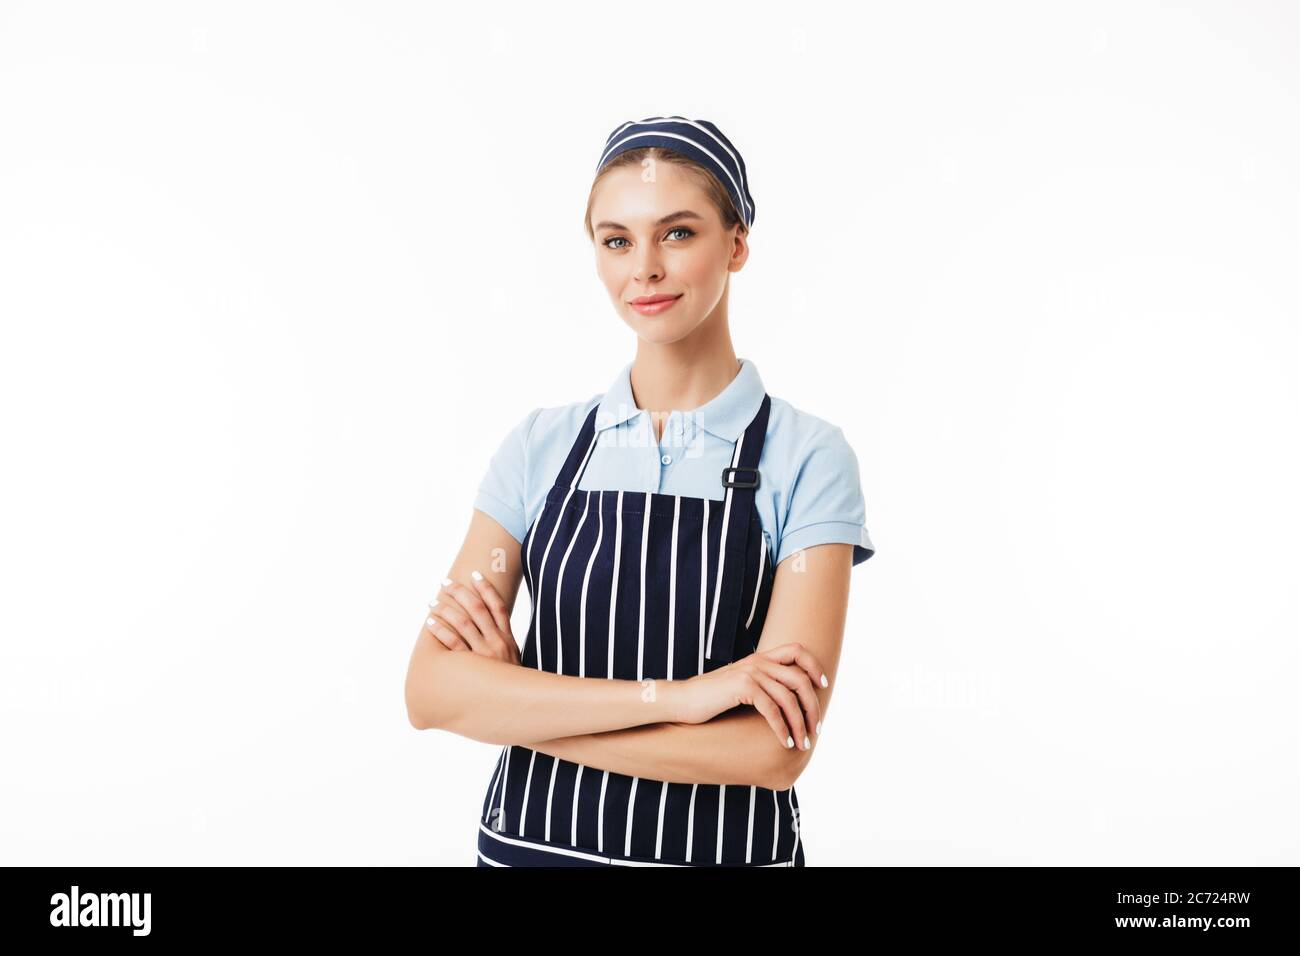 Beautiful woman cook in striped apron and cap dreamily looking in camera with arms folded over white background isolated Stock Photo